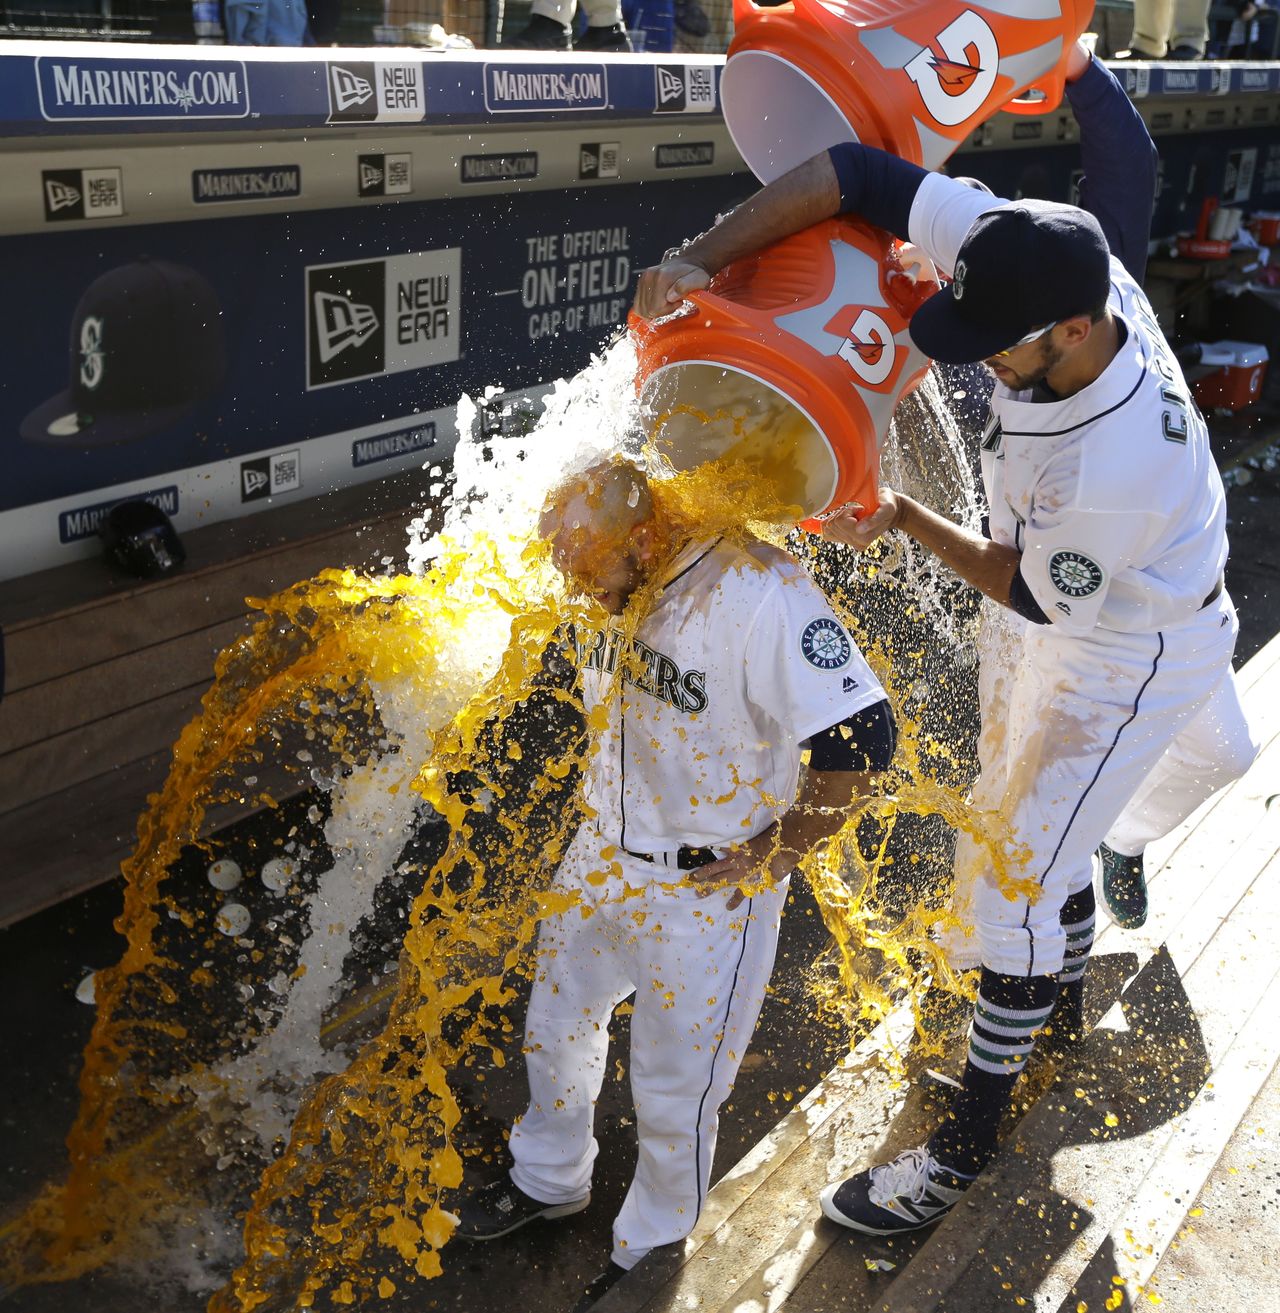 The Mariners’ Chris Iannetta is doused by teammates Steve Cishek (right) and Charlie Furbush (obscured) during a TV interview after Iannetta hit a walk-off solo home run during the 11th inning to lift Seattle to a 6-5 victory over the Rays.